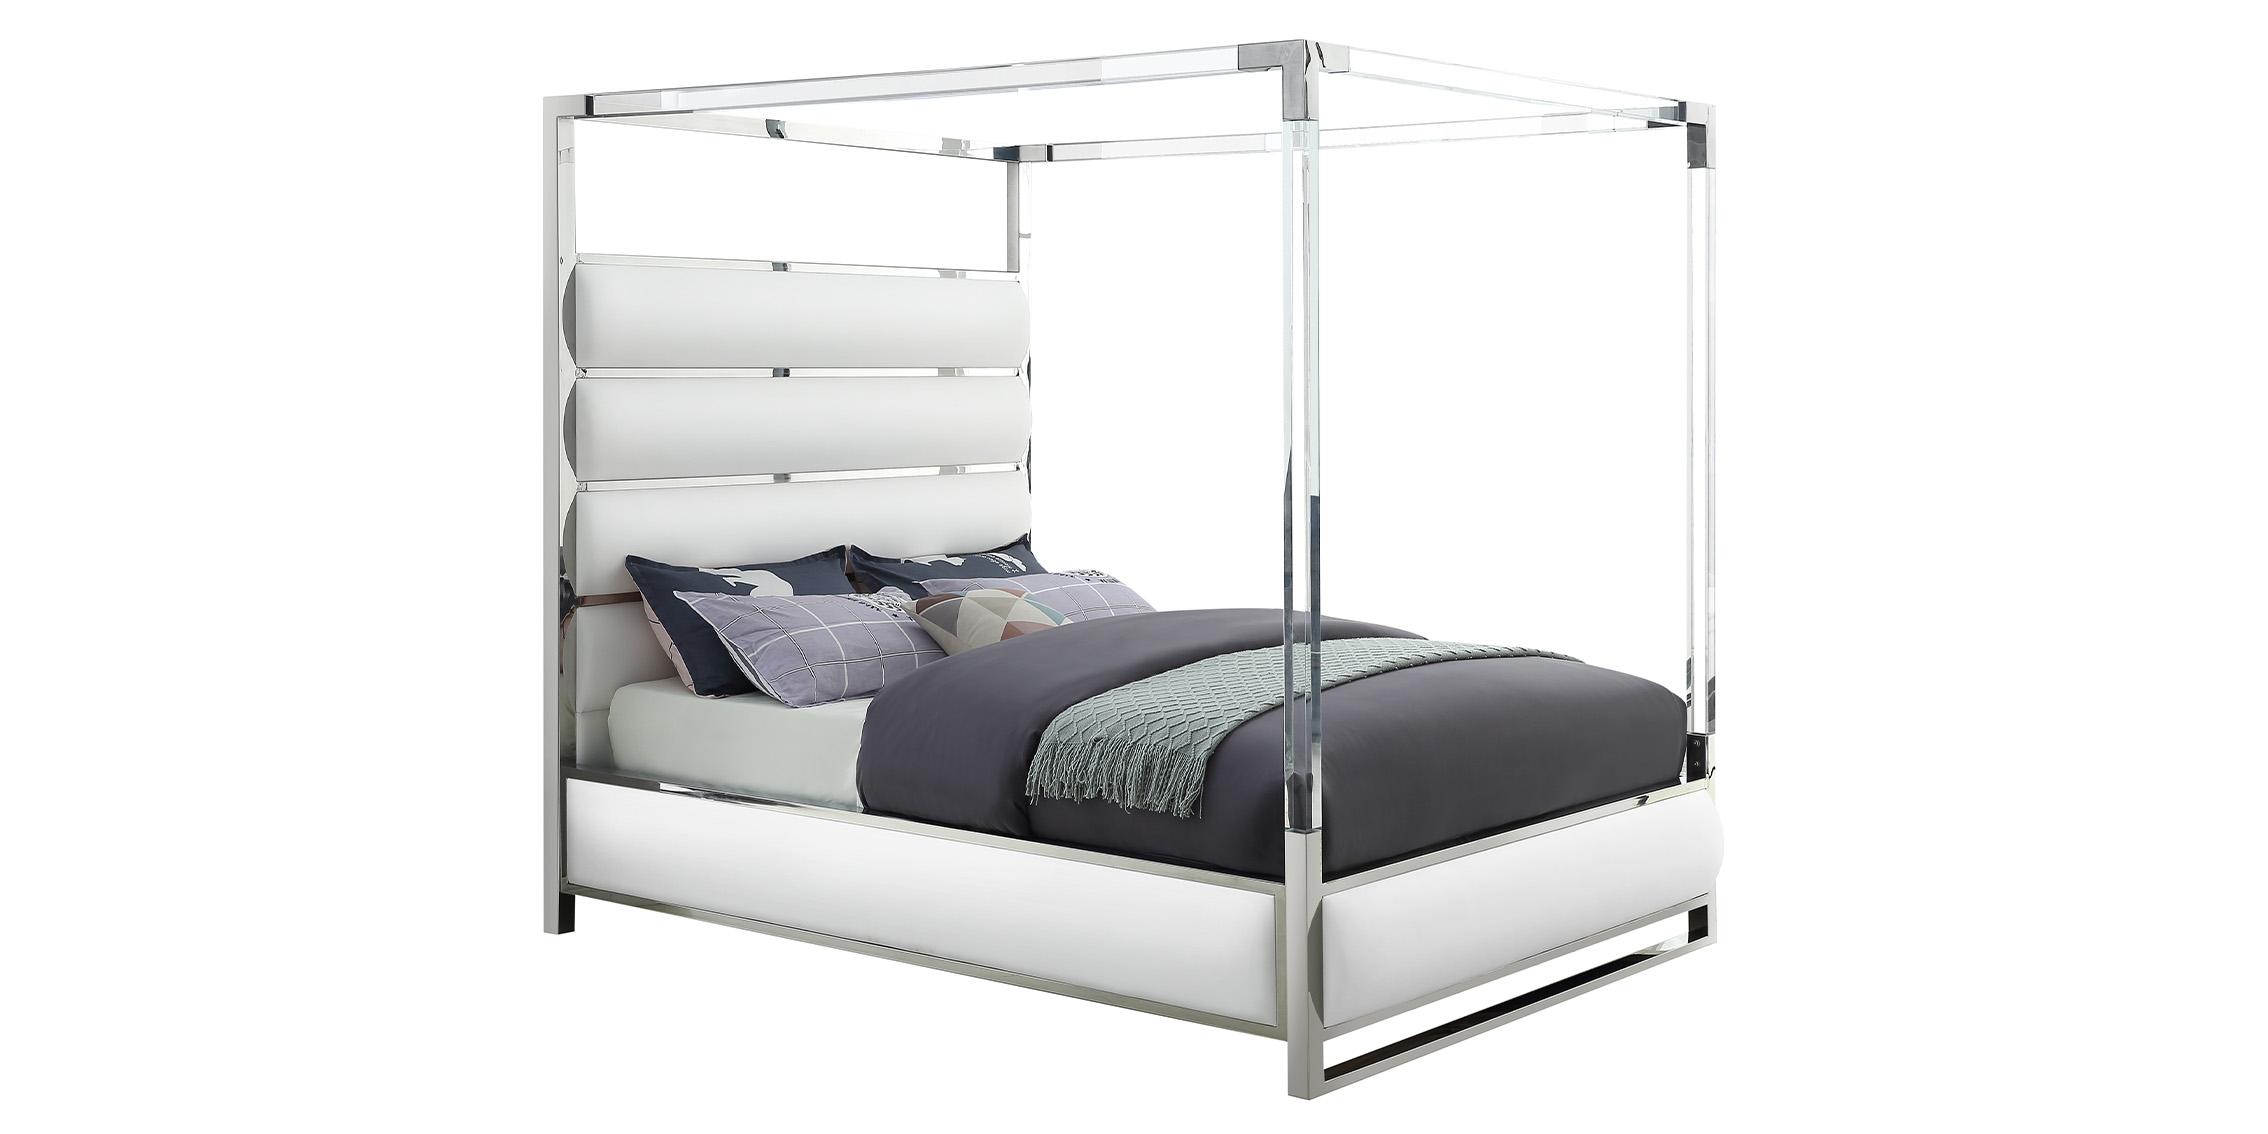 

    
Glam White Faux Leather & Chrome Canopy Queen Bed ENCORE Meridian Modern
